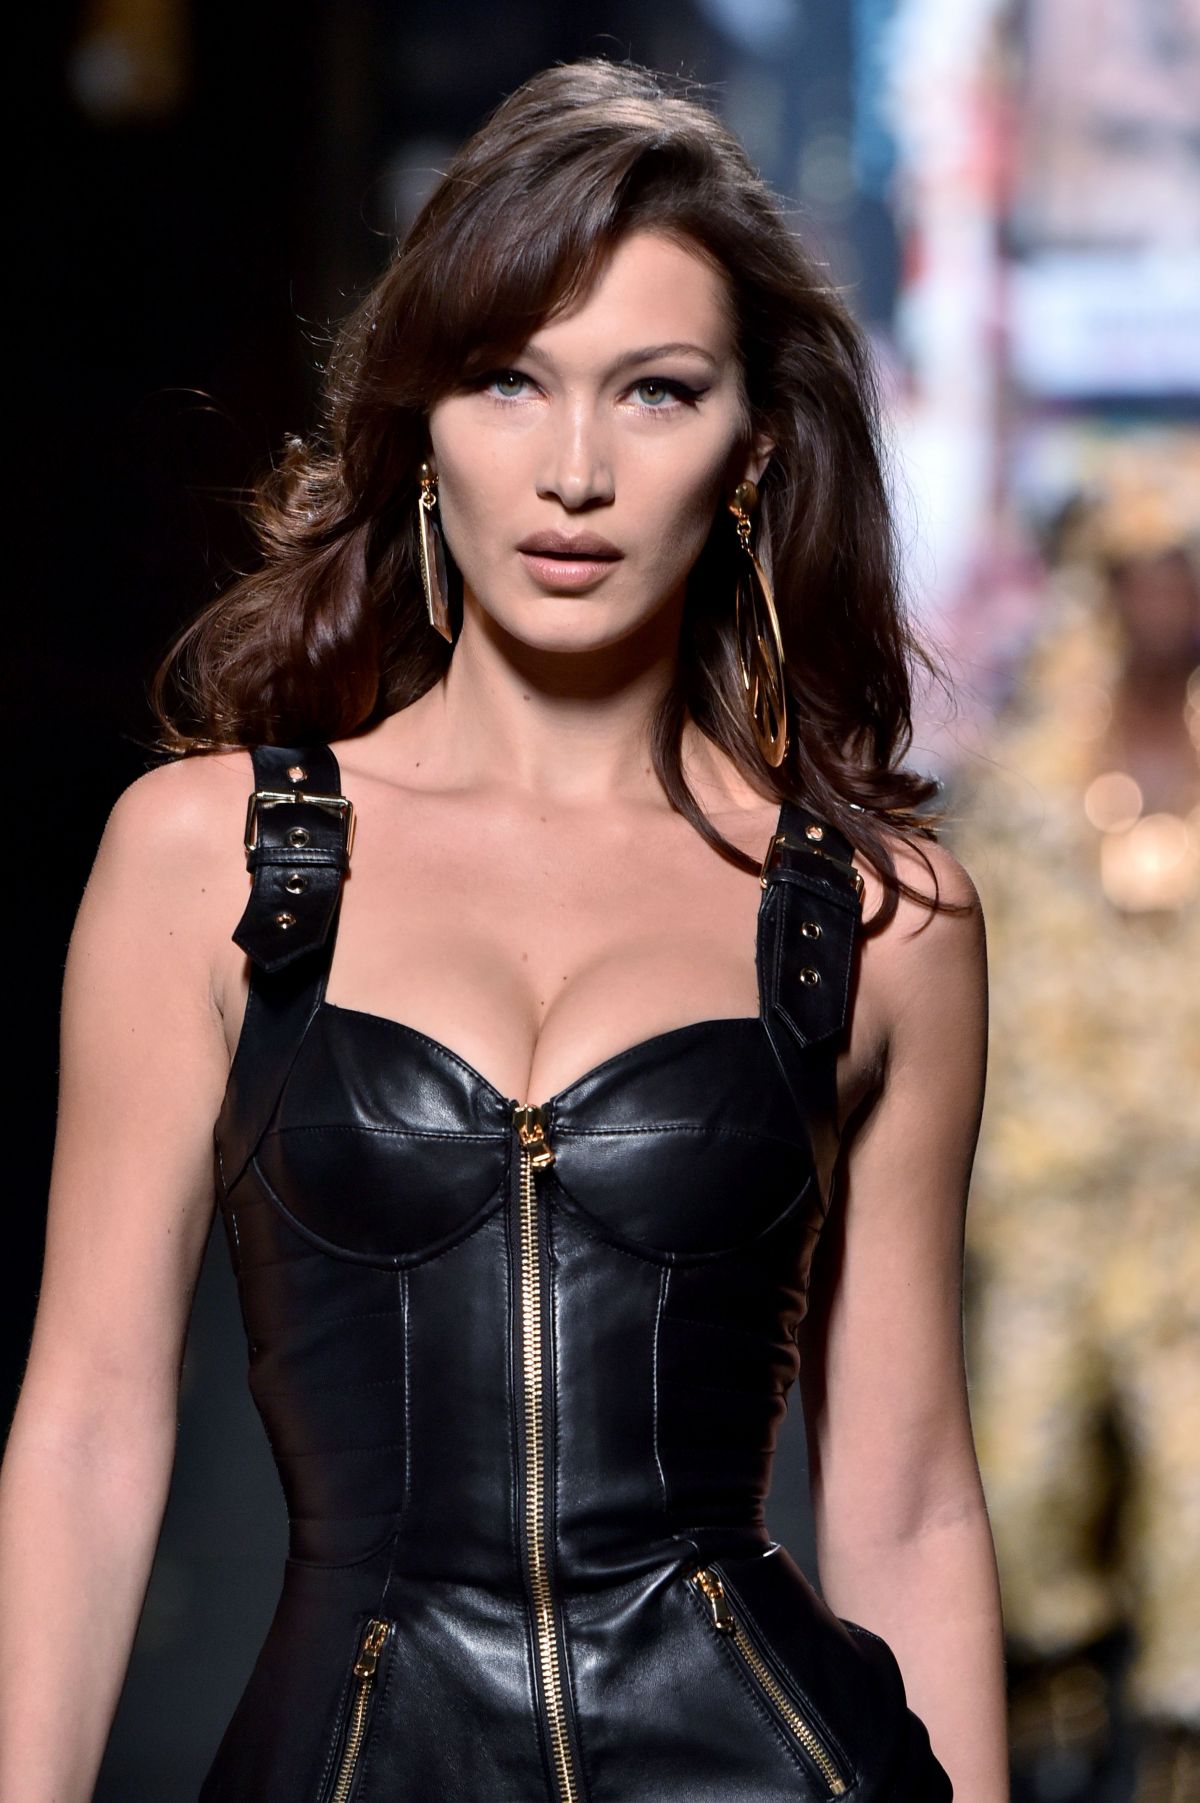 bella-hadid-at-moschino-x-h-m-show-in-new-york-10-24-2018-3.jpg